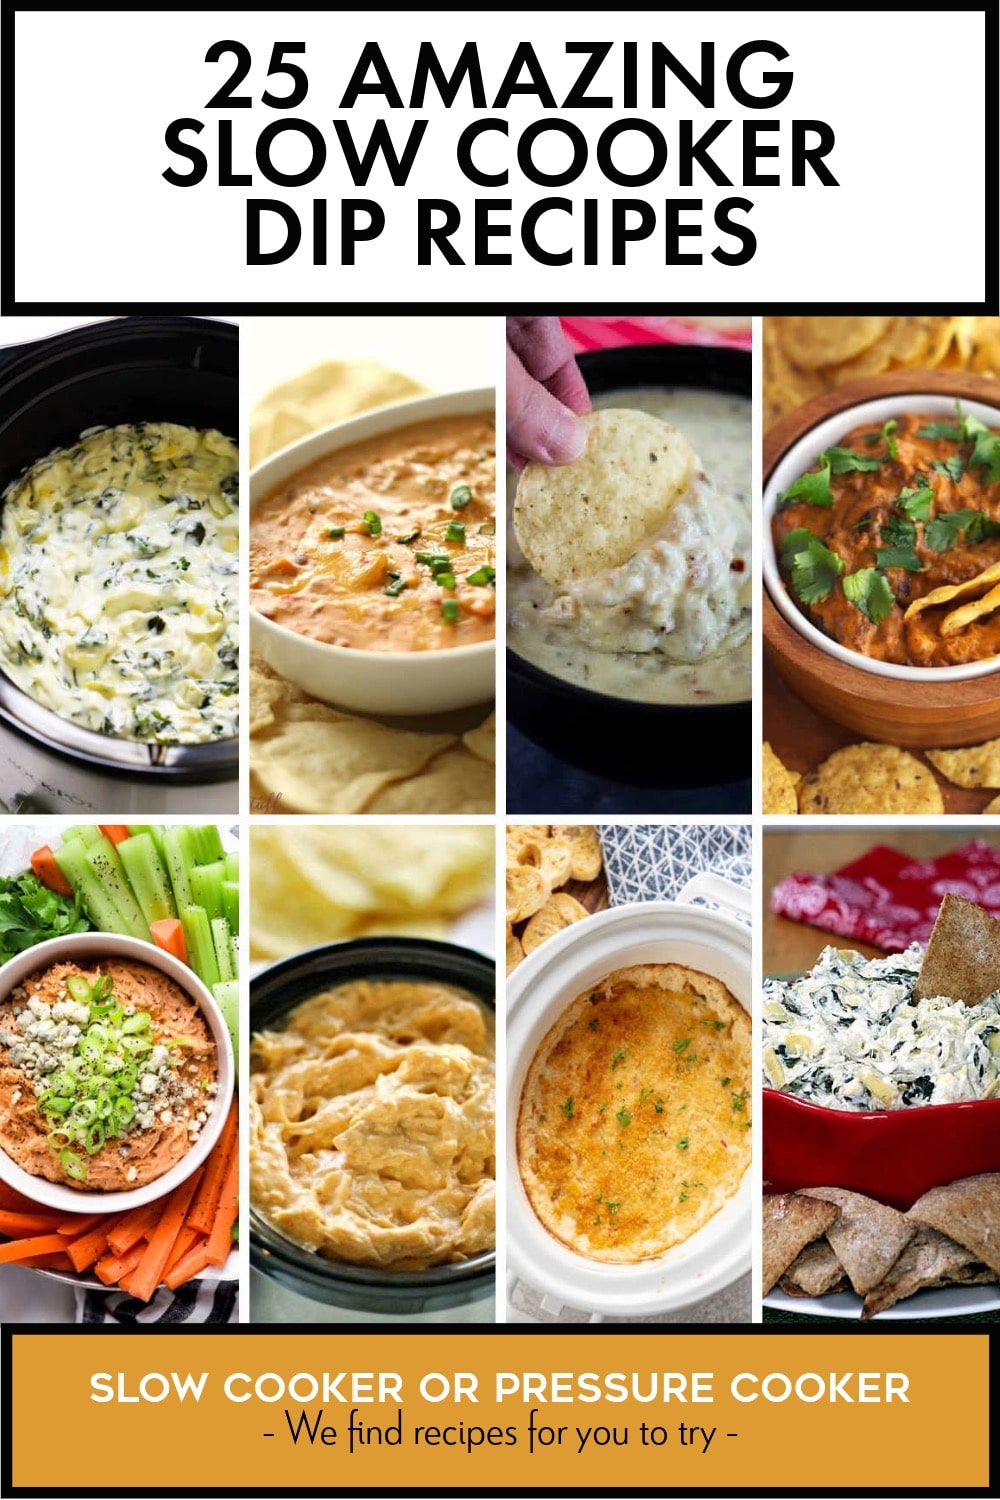 Pinterest image of 25 Amazing Slow Cooker Dip Recipes